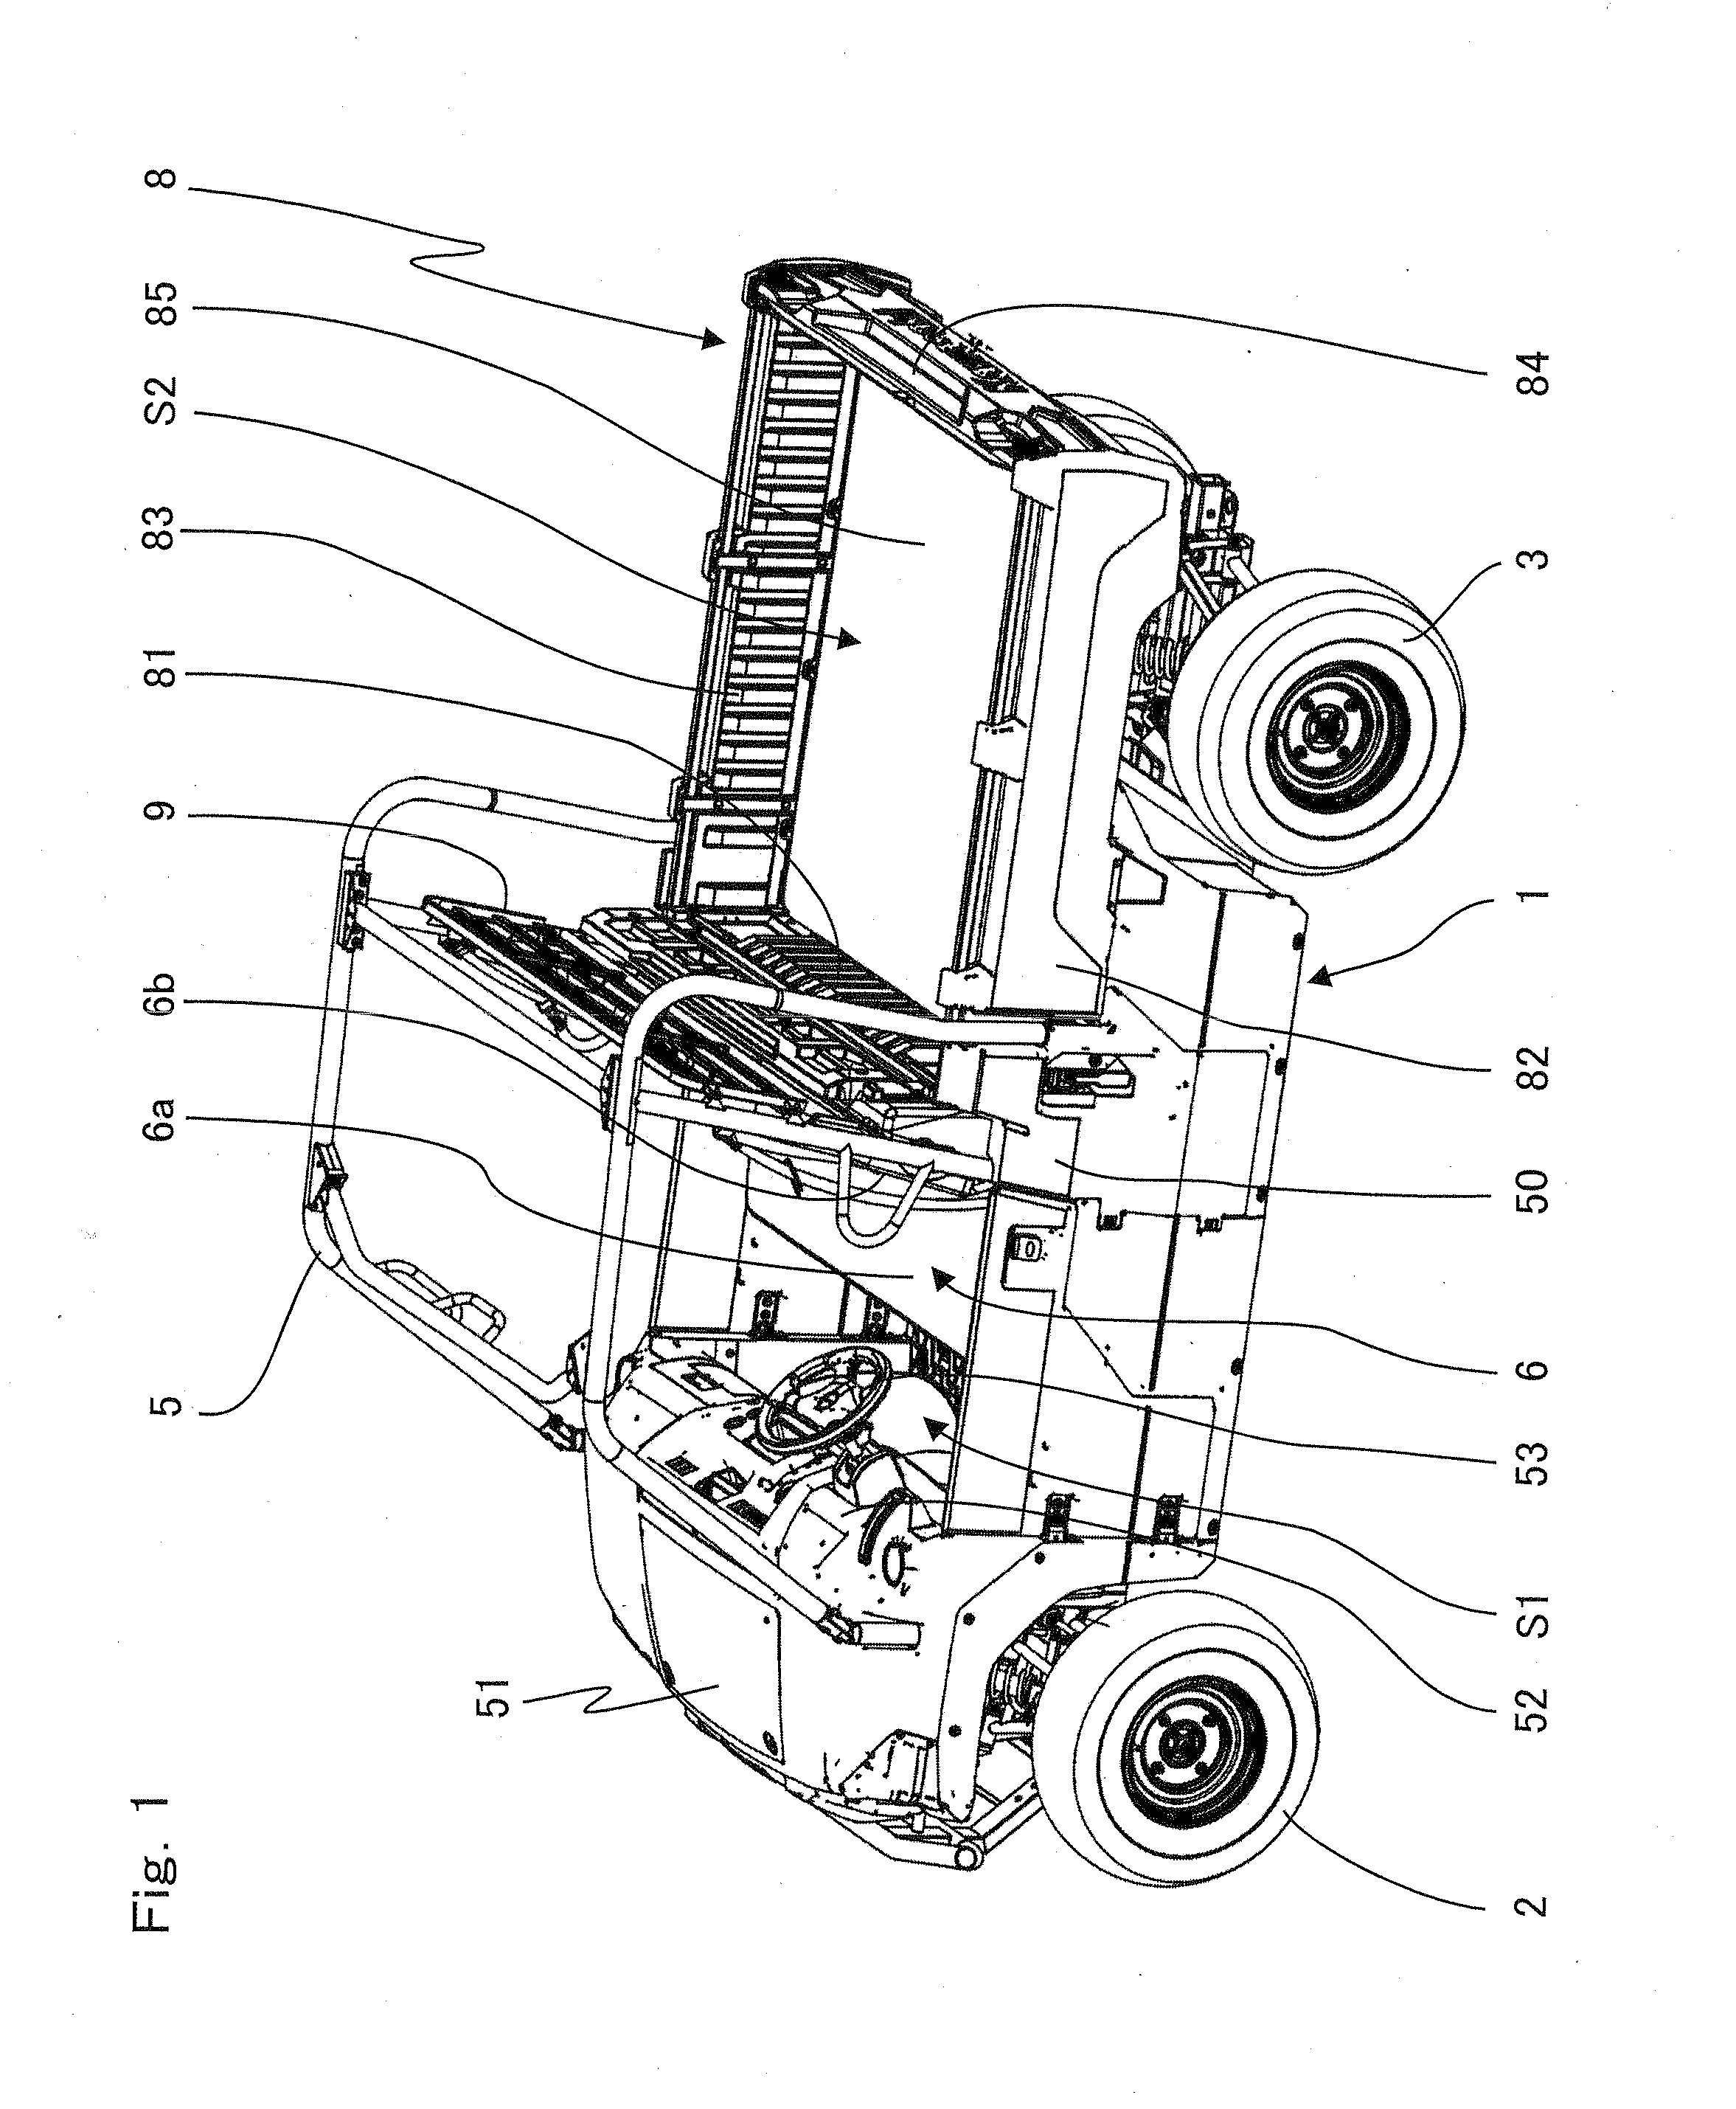 Cargo bed and utility vehicle with the cargo bed